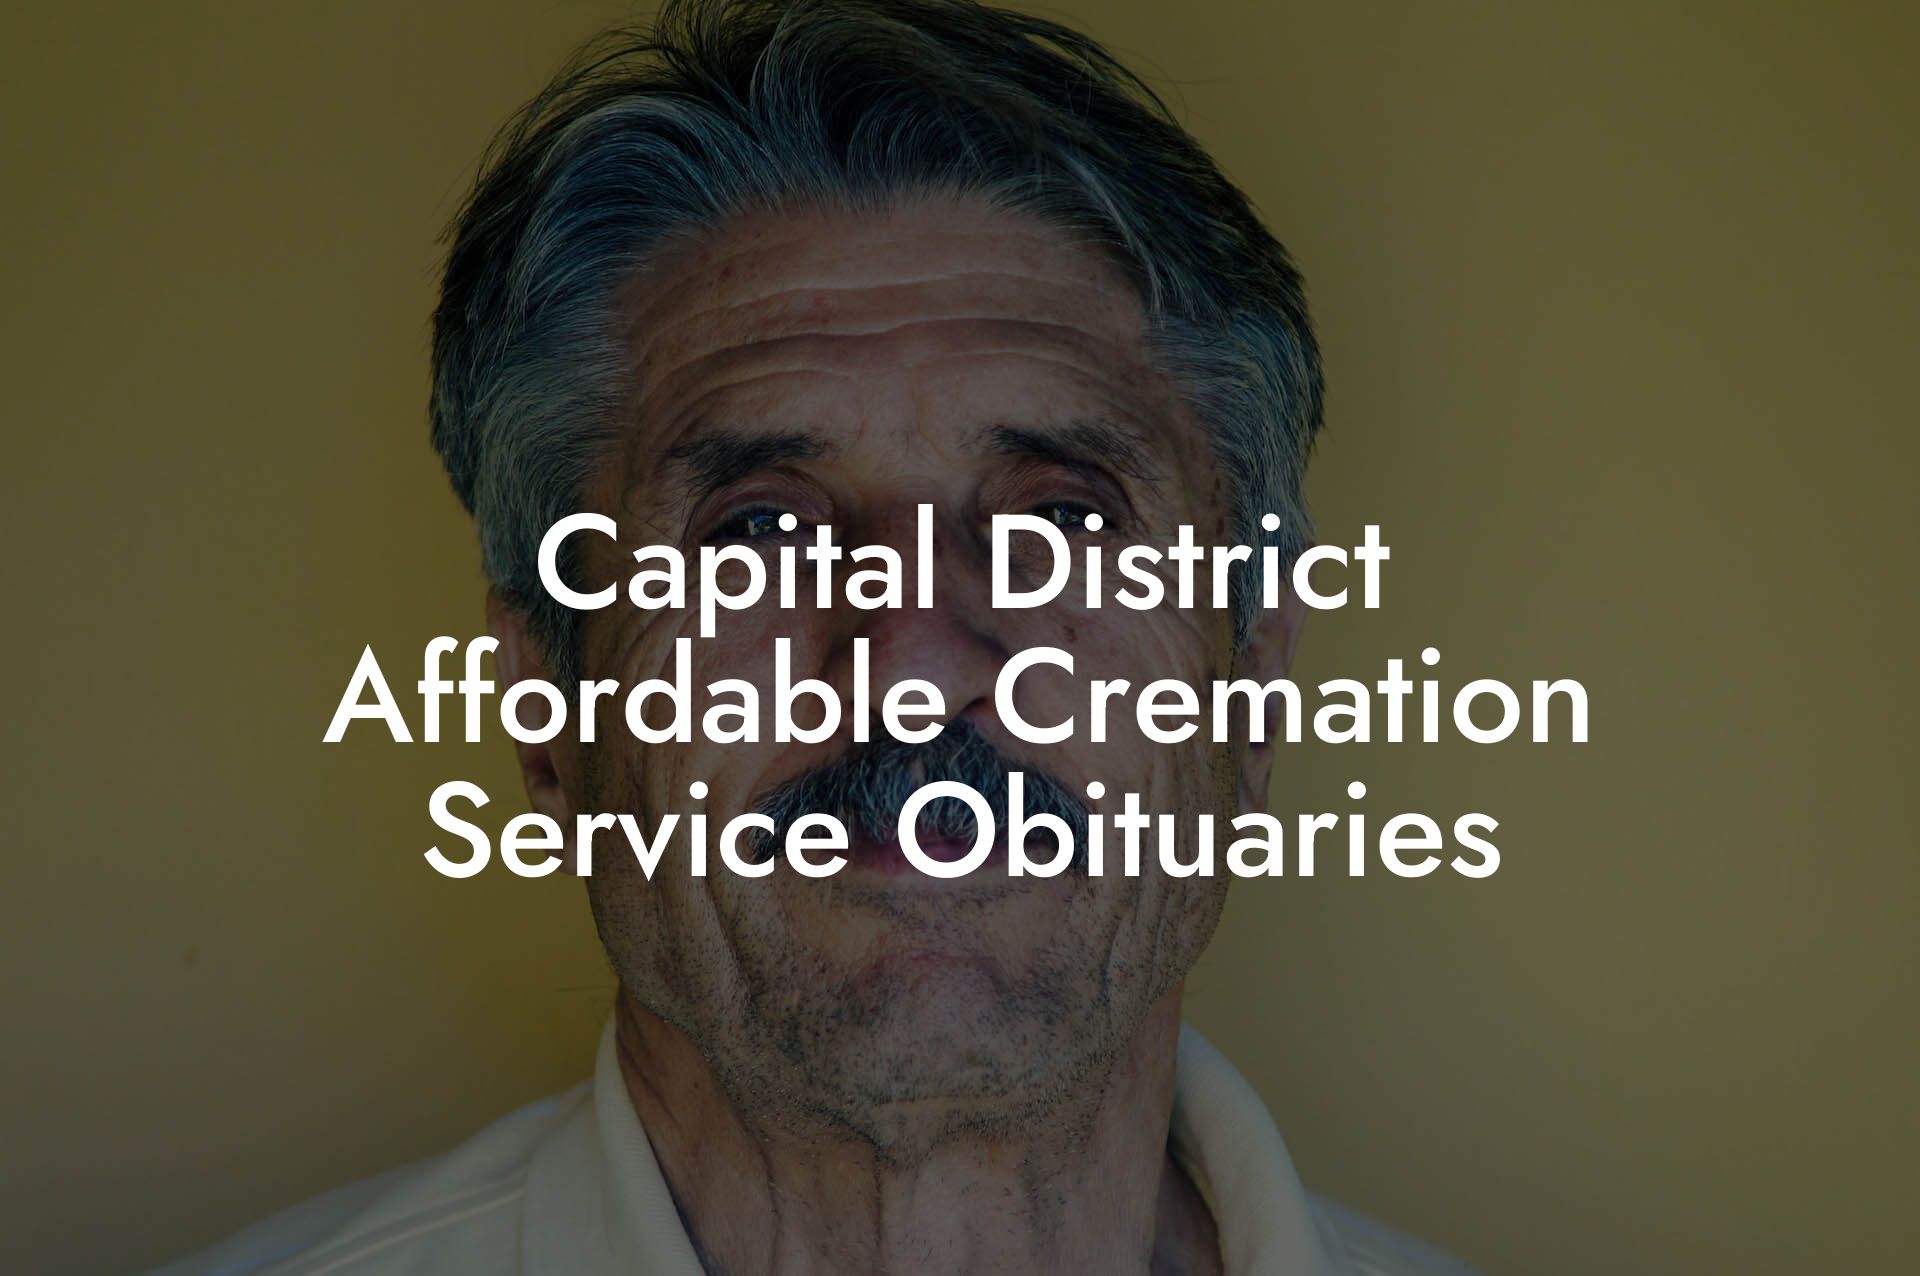 Capital District Affordable Cremation Service Obituaries